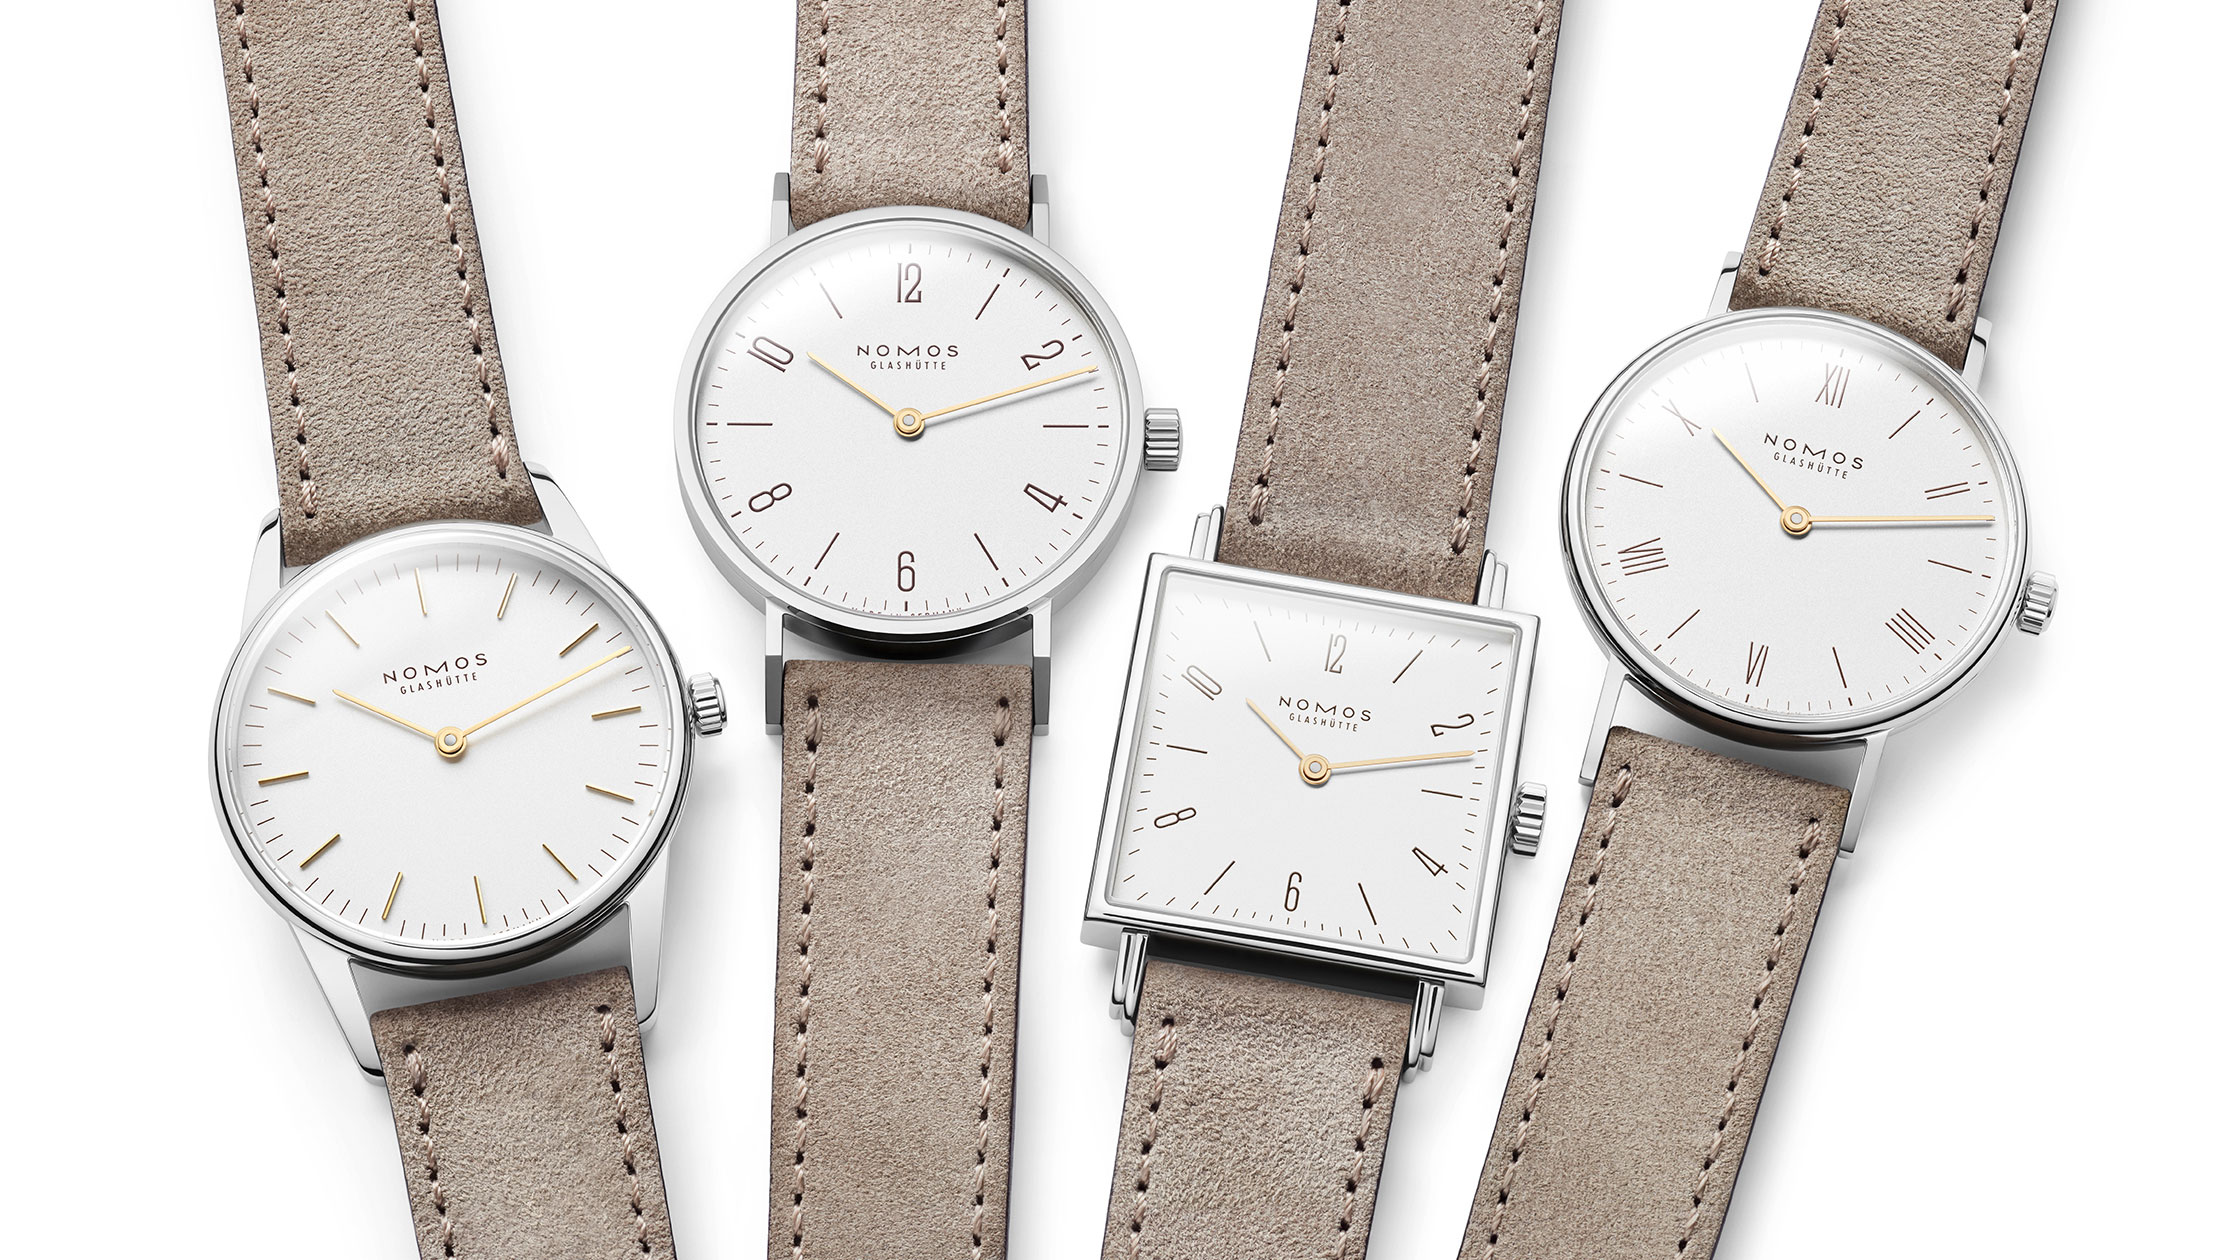 Introducing: The NOMOS Glashütte Duo Collection   Hodinkee